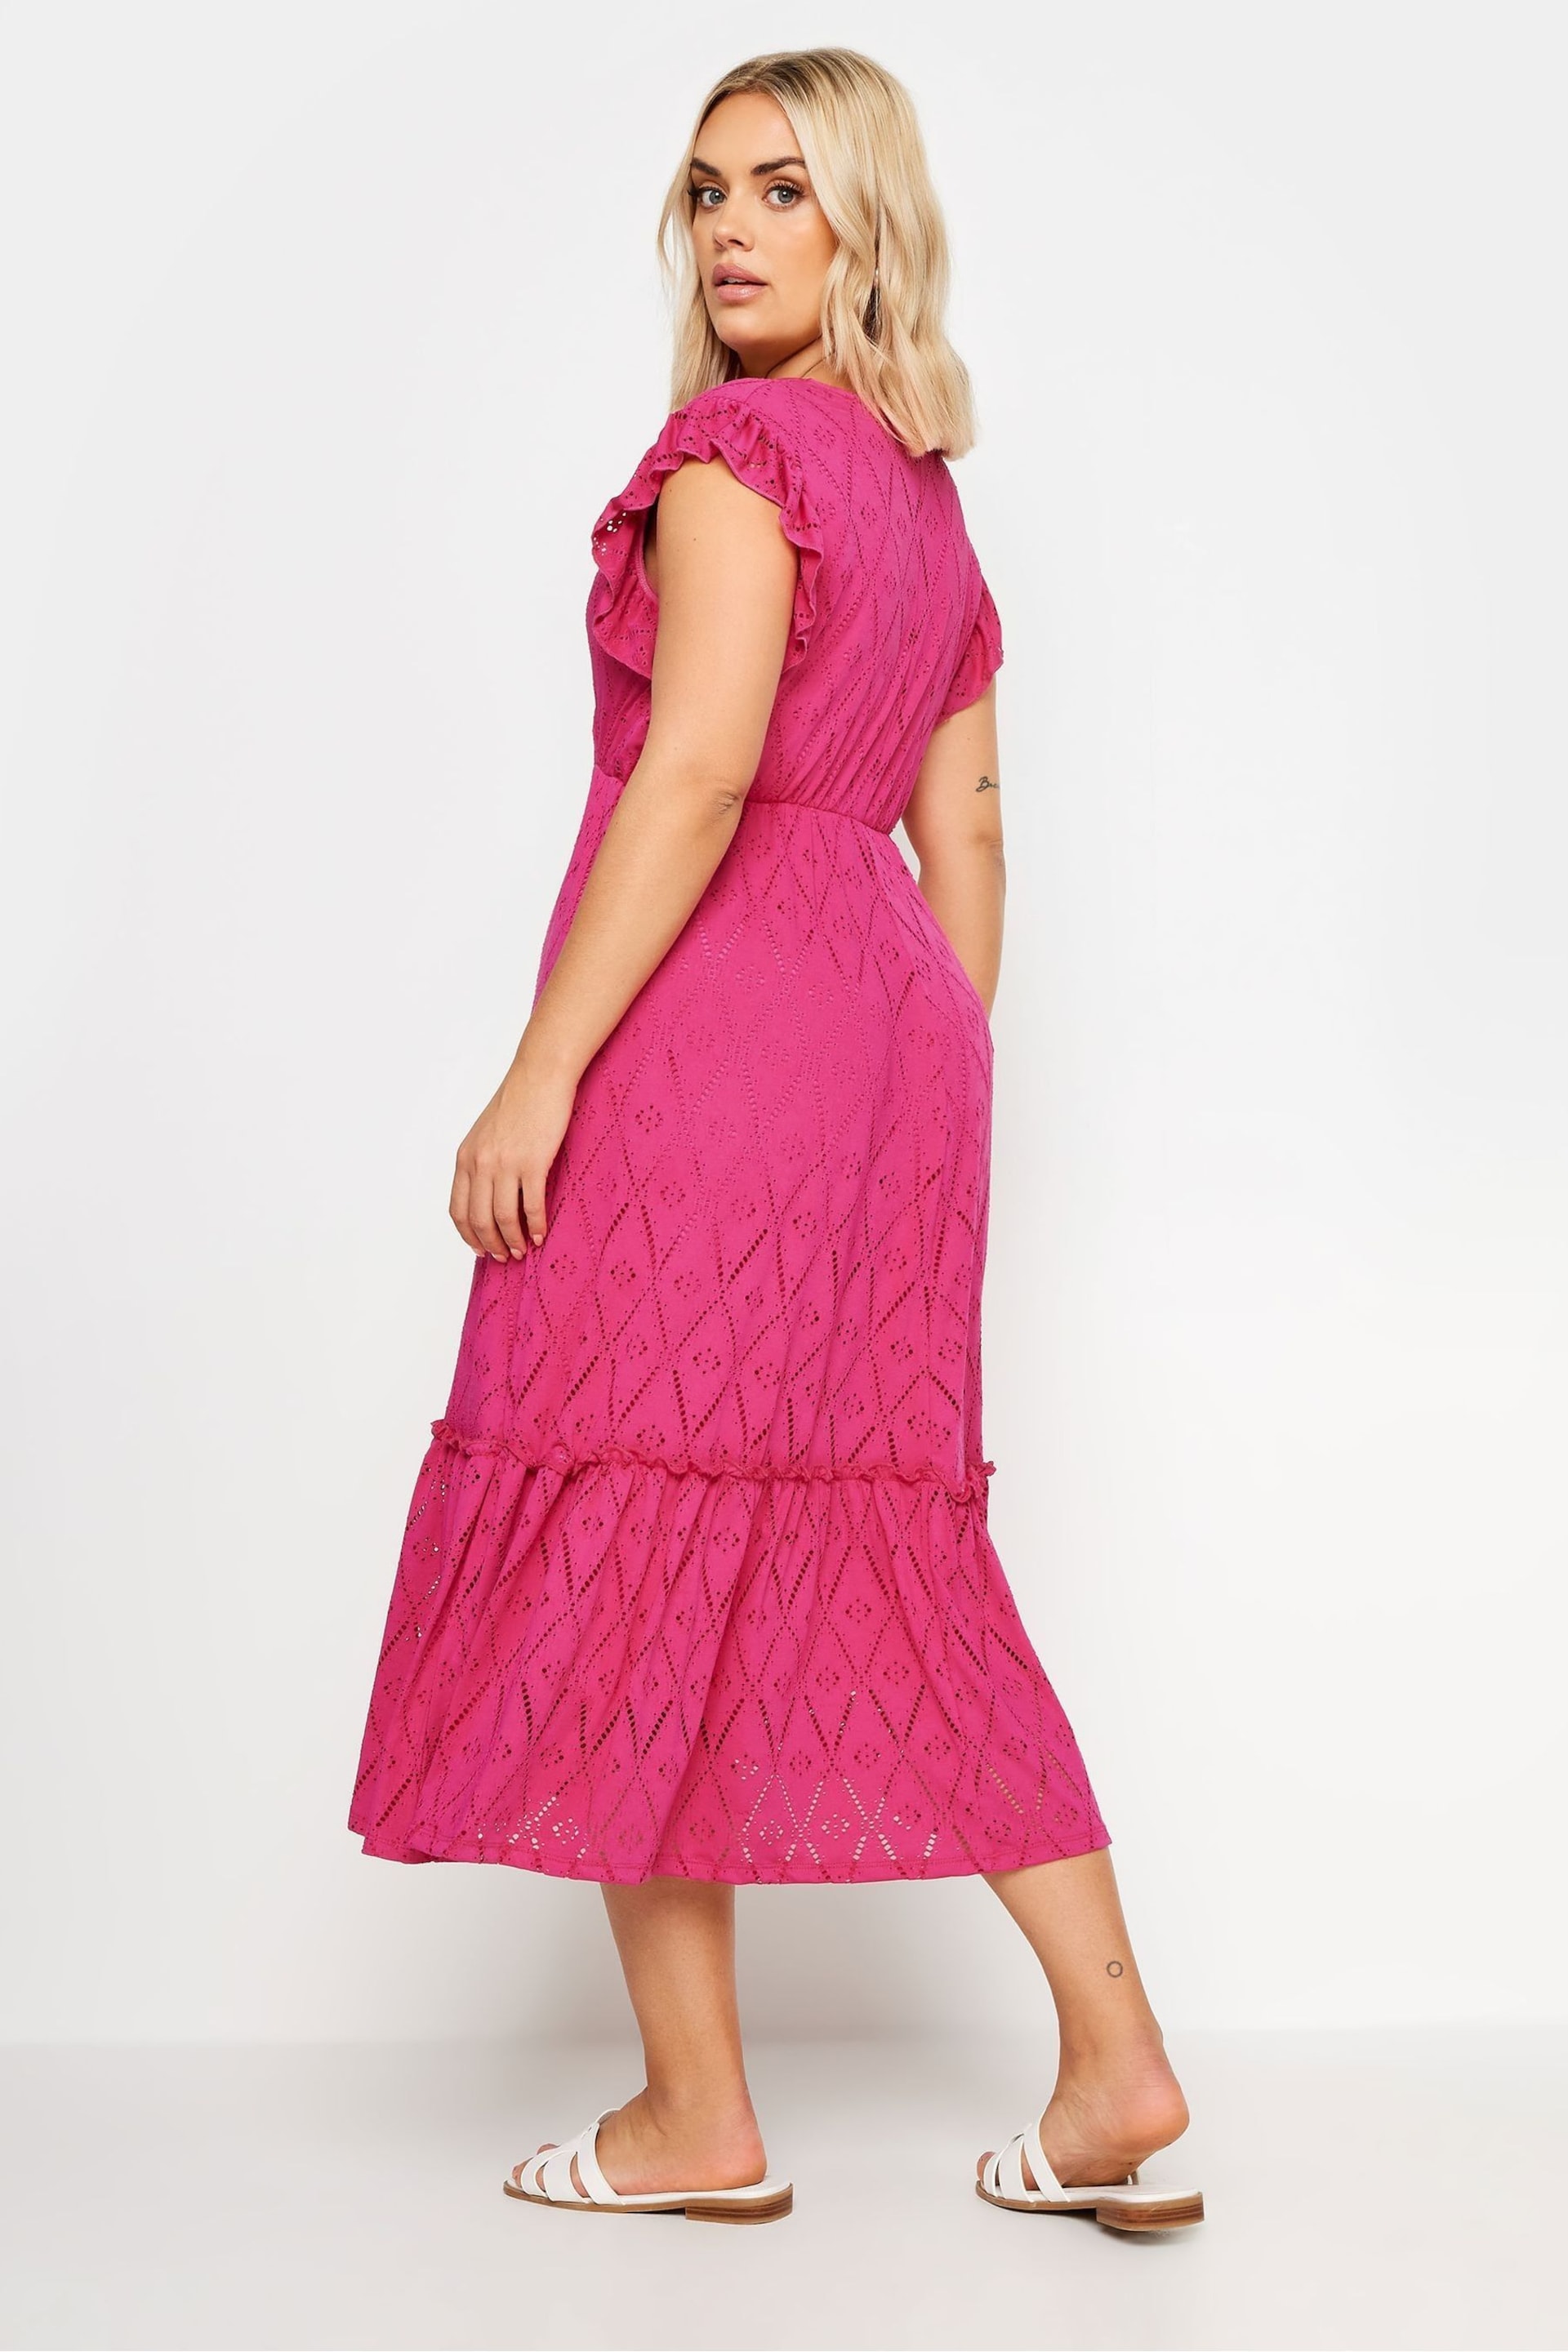 Yours Curve Pink Broderie Anglaise Dress - Image 3 of 5